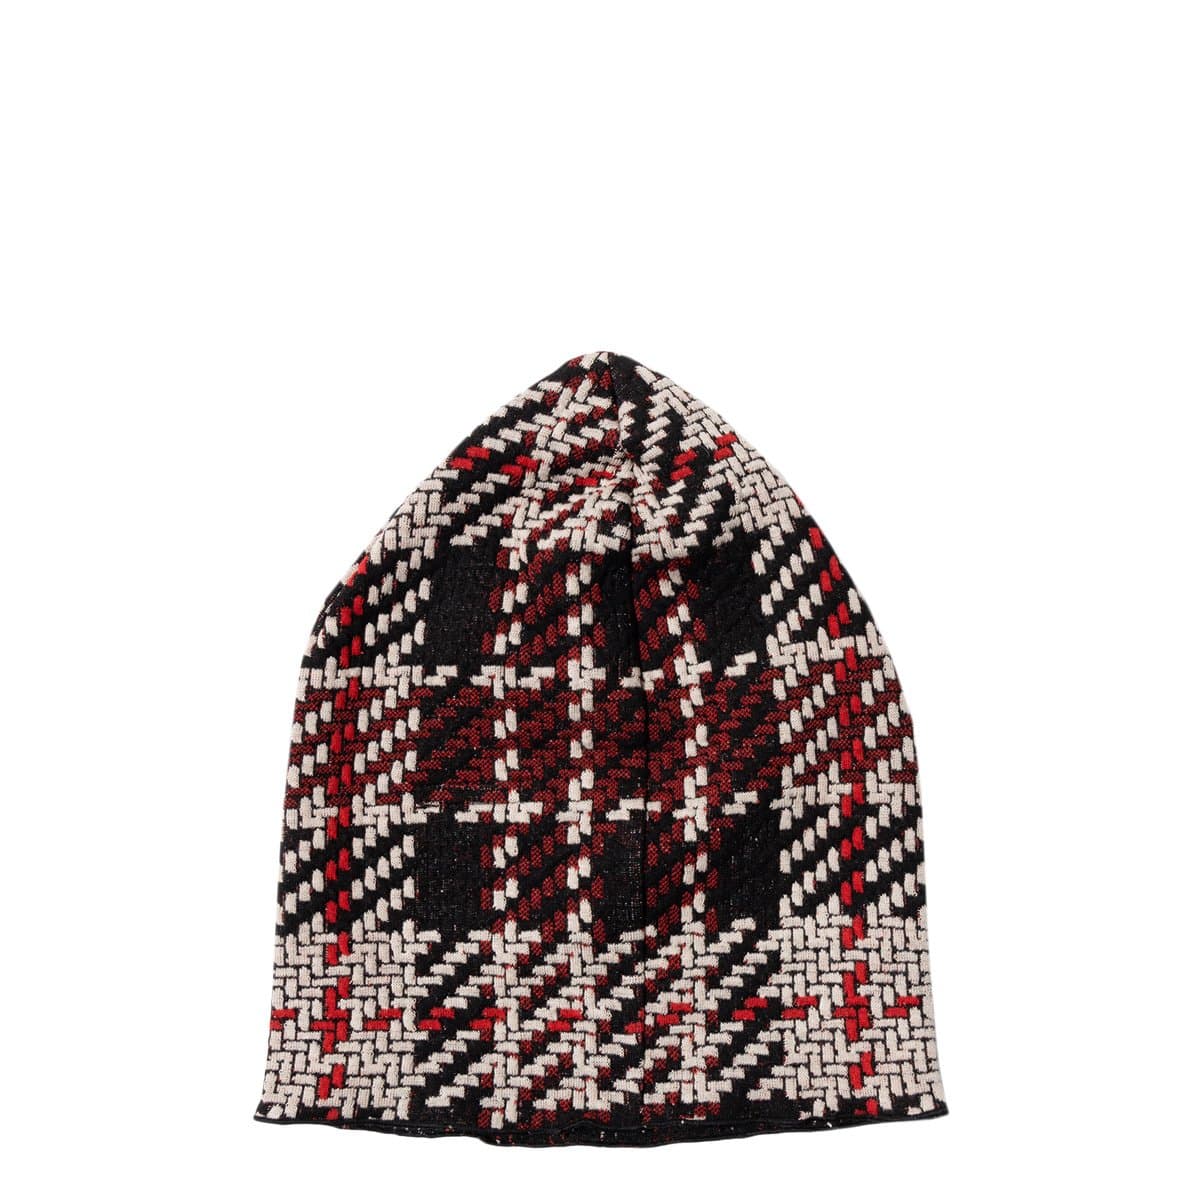 Engineered Garments Bags & Accessories BLACK/RED TWEED KNIT / OS KNIT BEANIE CAP